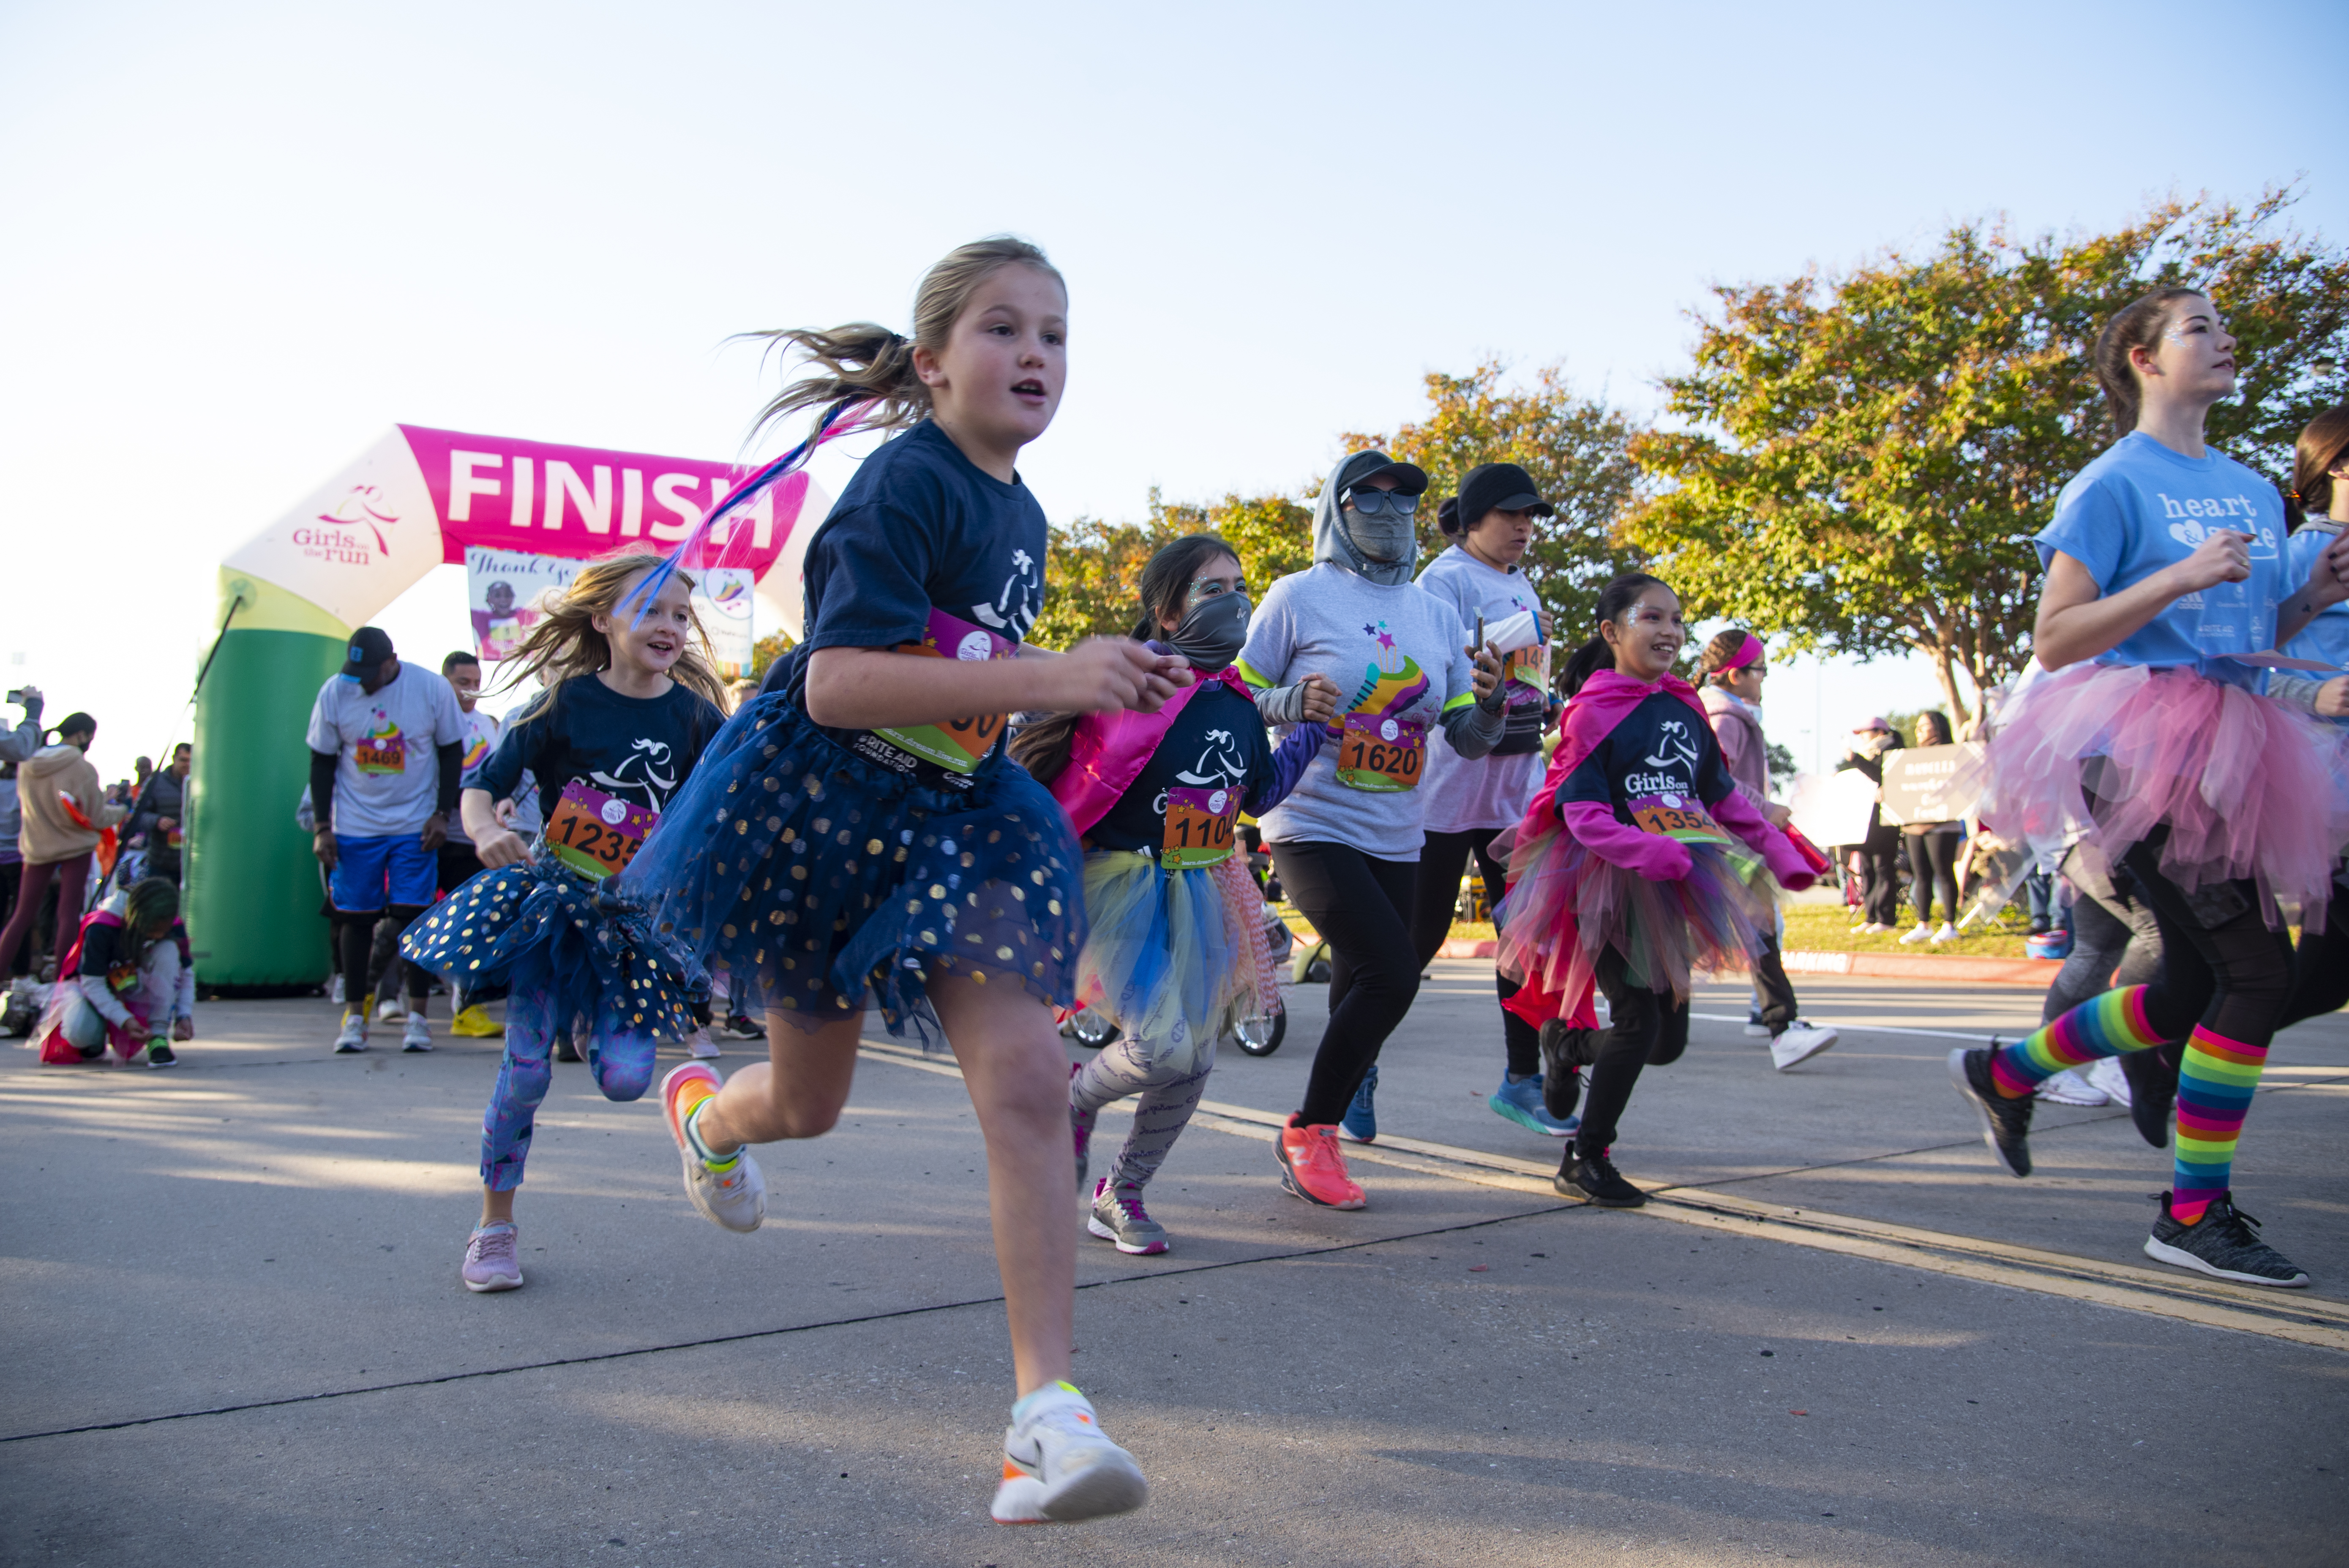 Girls on the Run group helps North Texas youths find confidence and joy